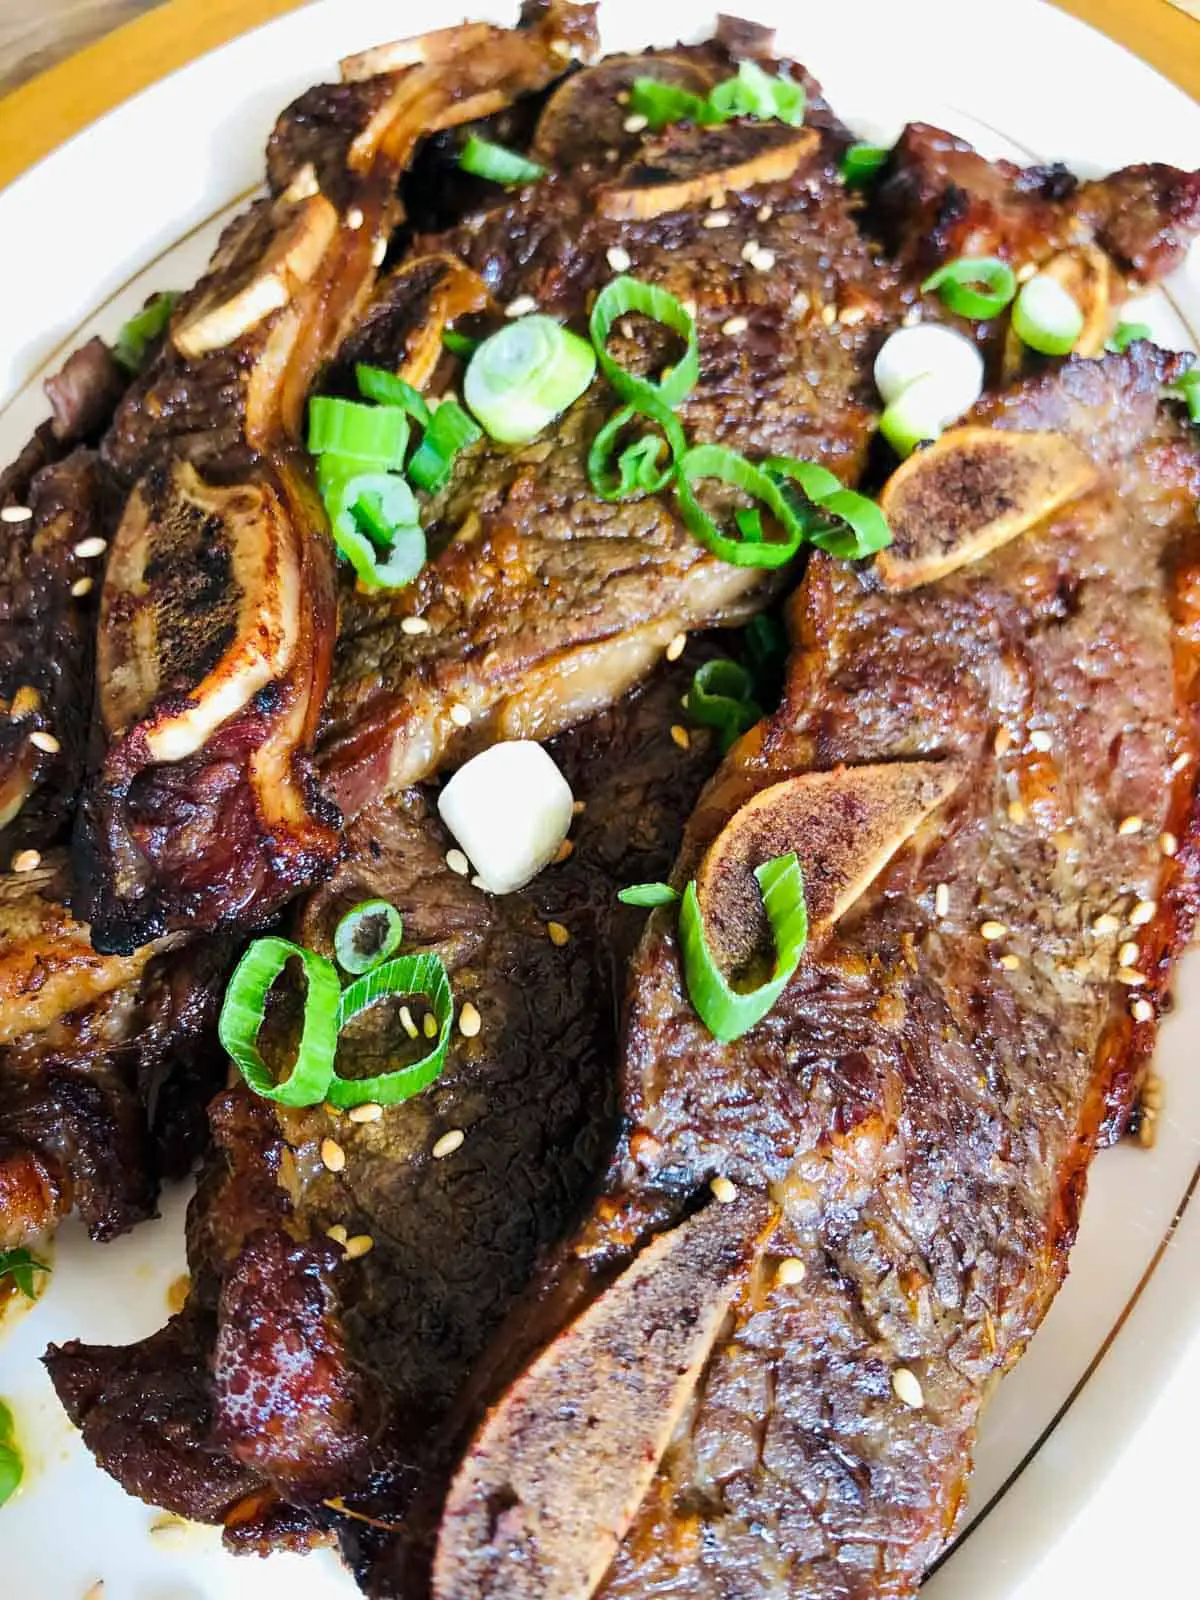 Korean short ribs (kalbi) on a gold rimmed plate garnished with green onions.